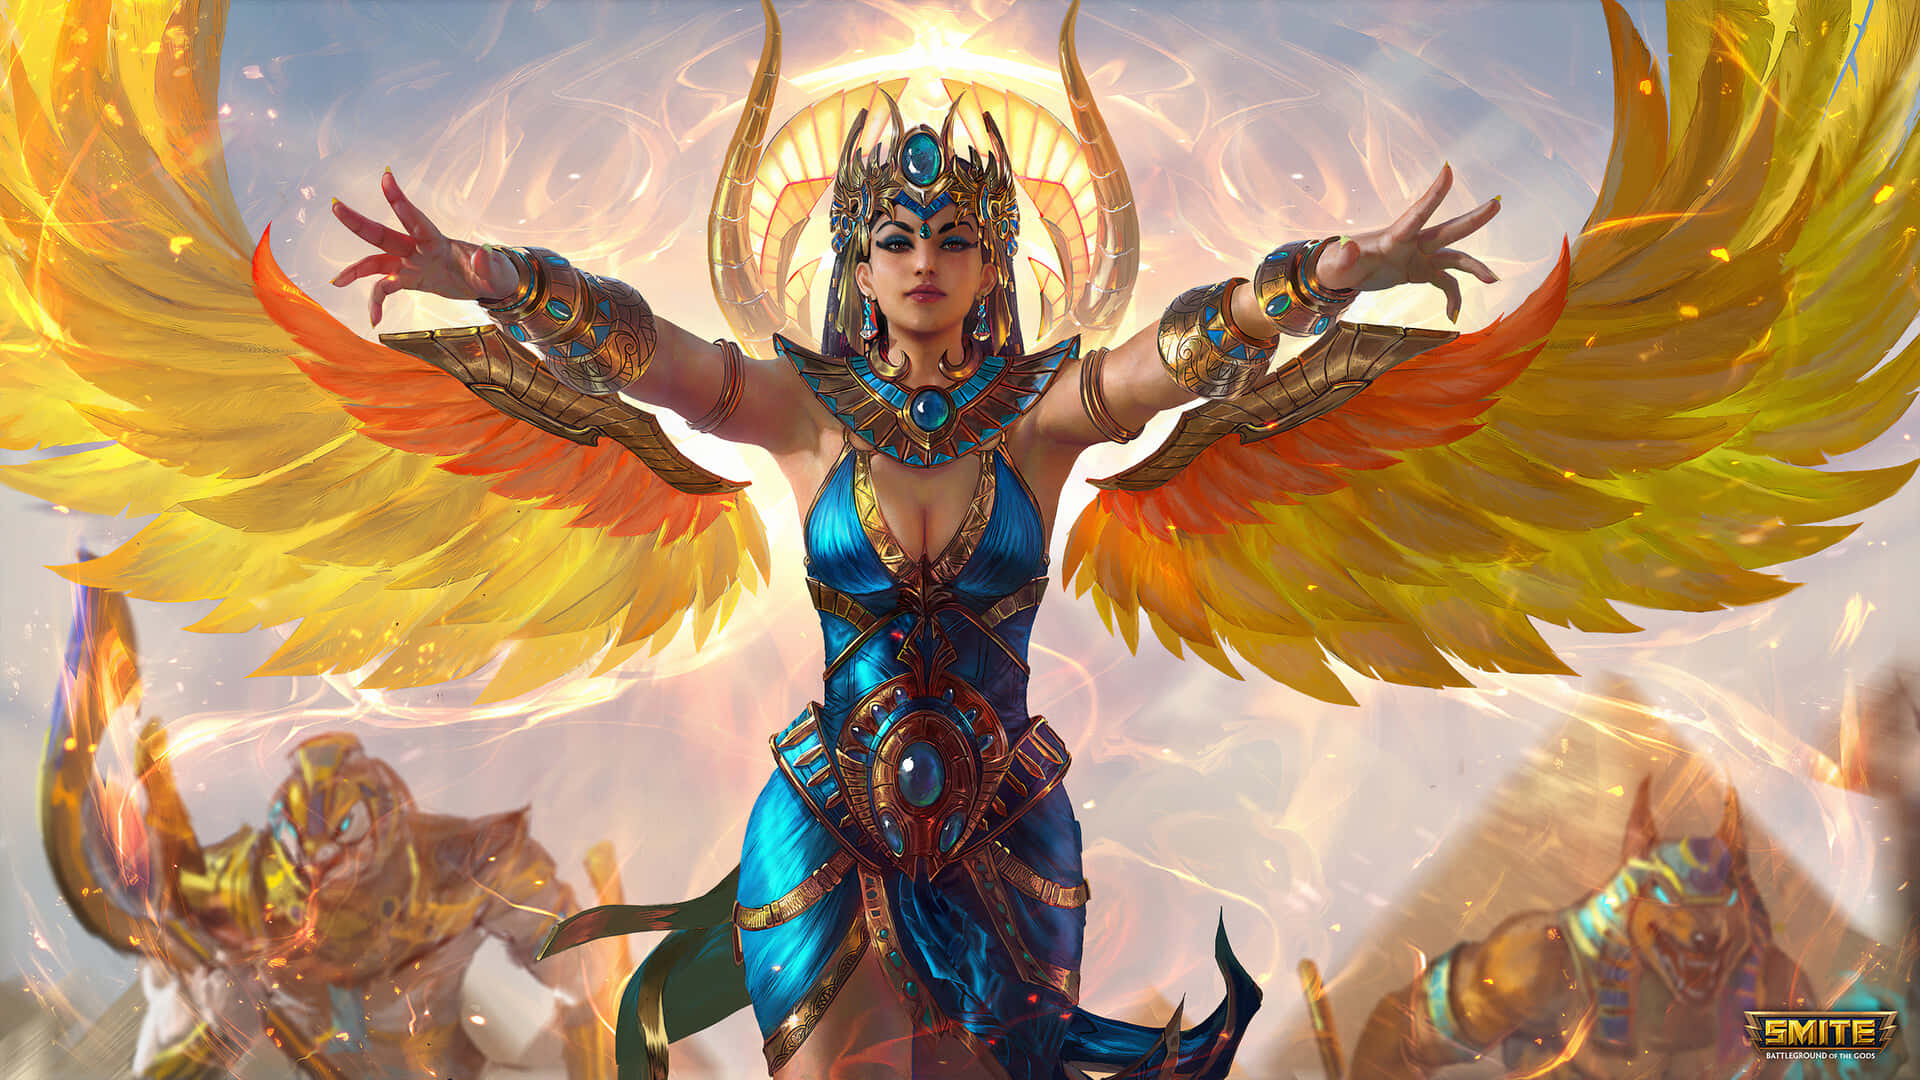 Immerse Yourself in the Epic World of SMITE Wallpaper